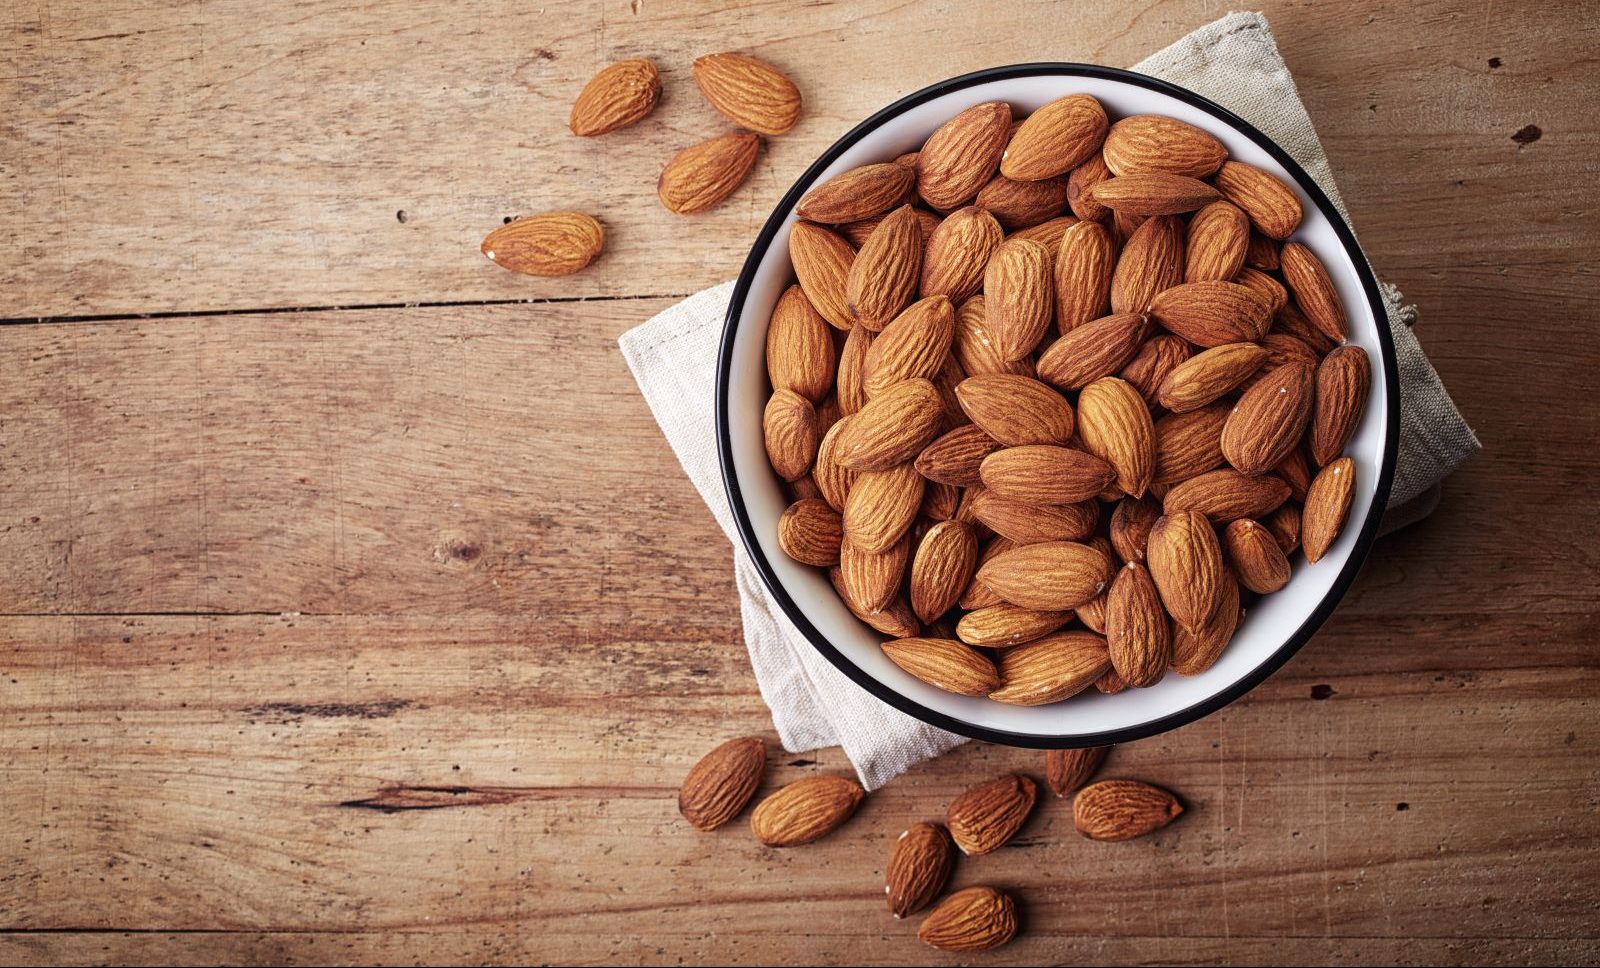 A doctor shares tips to choose the best snack for weight loss. Learn the benefits of substituting almonds for unhealthy snacks.